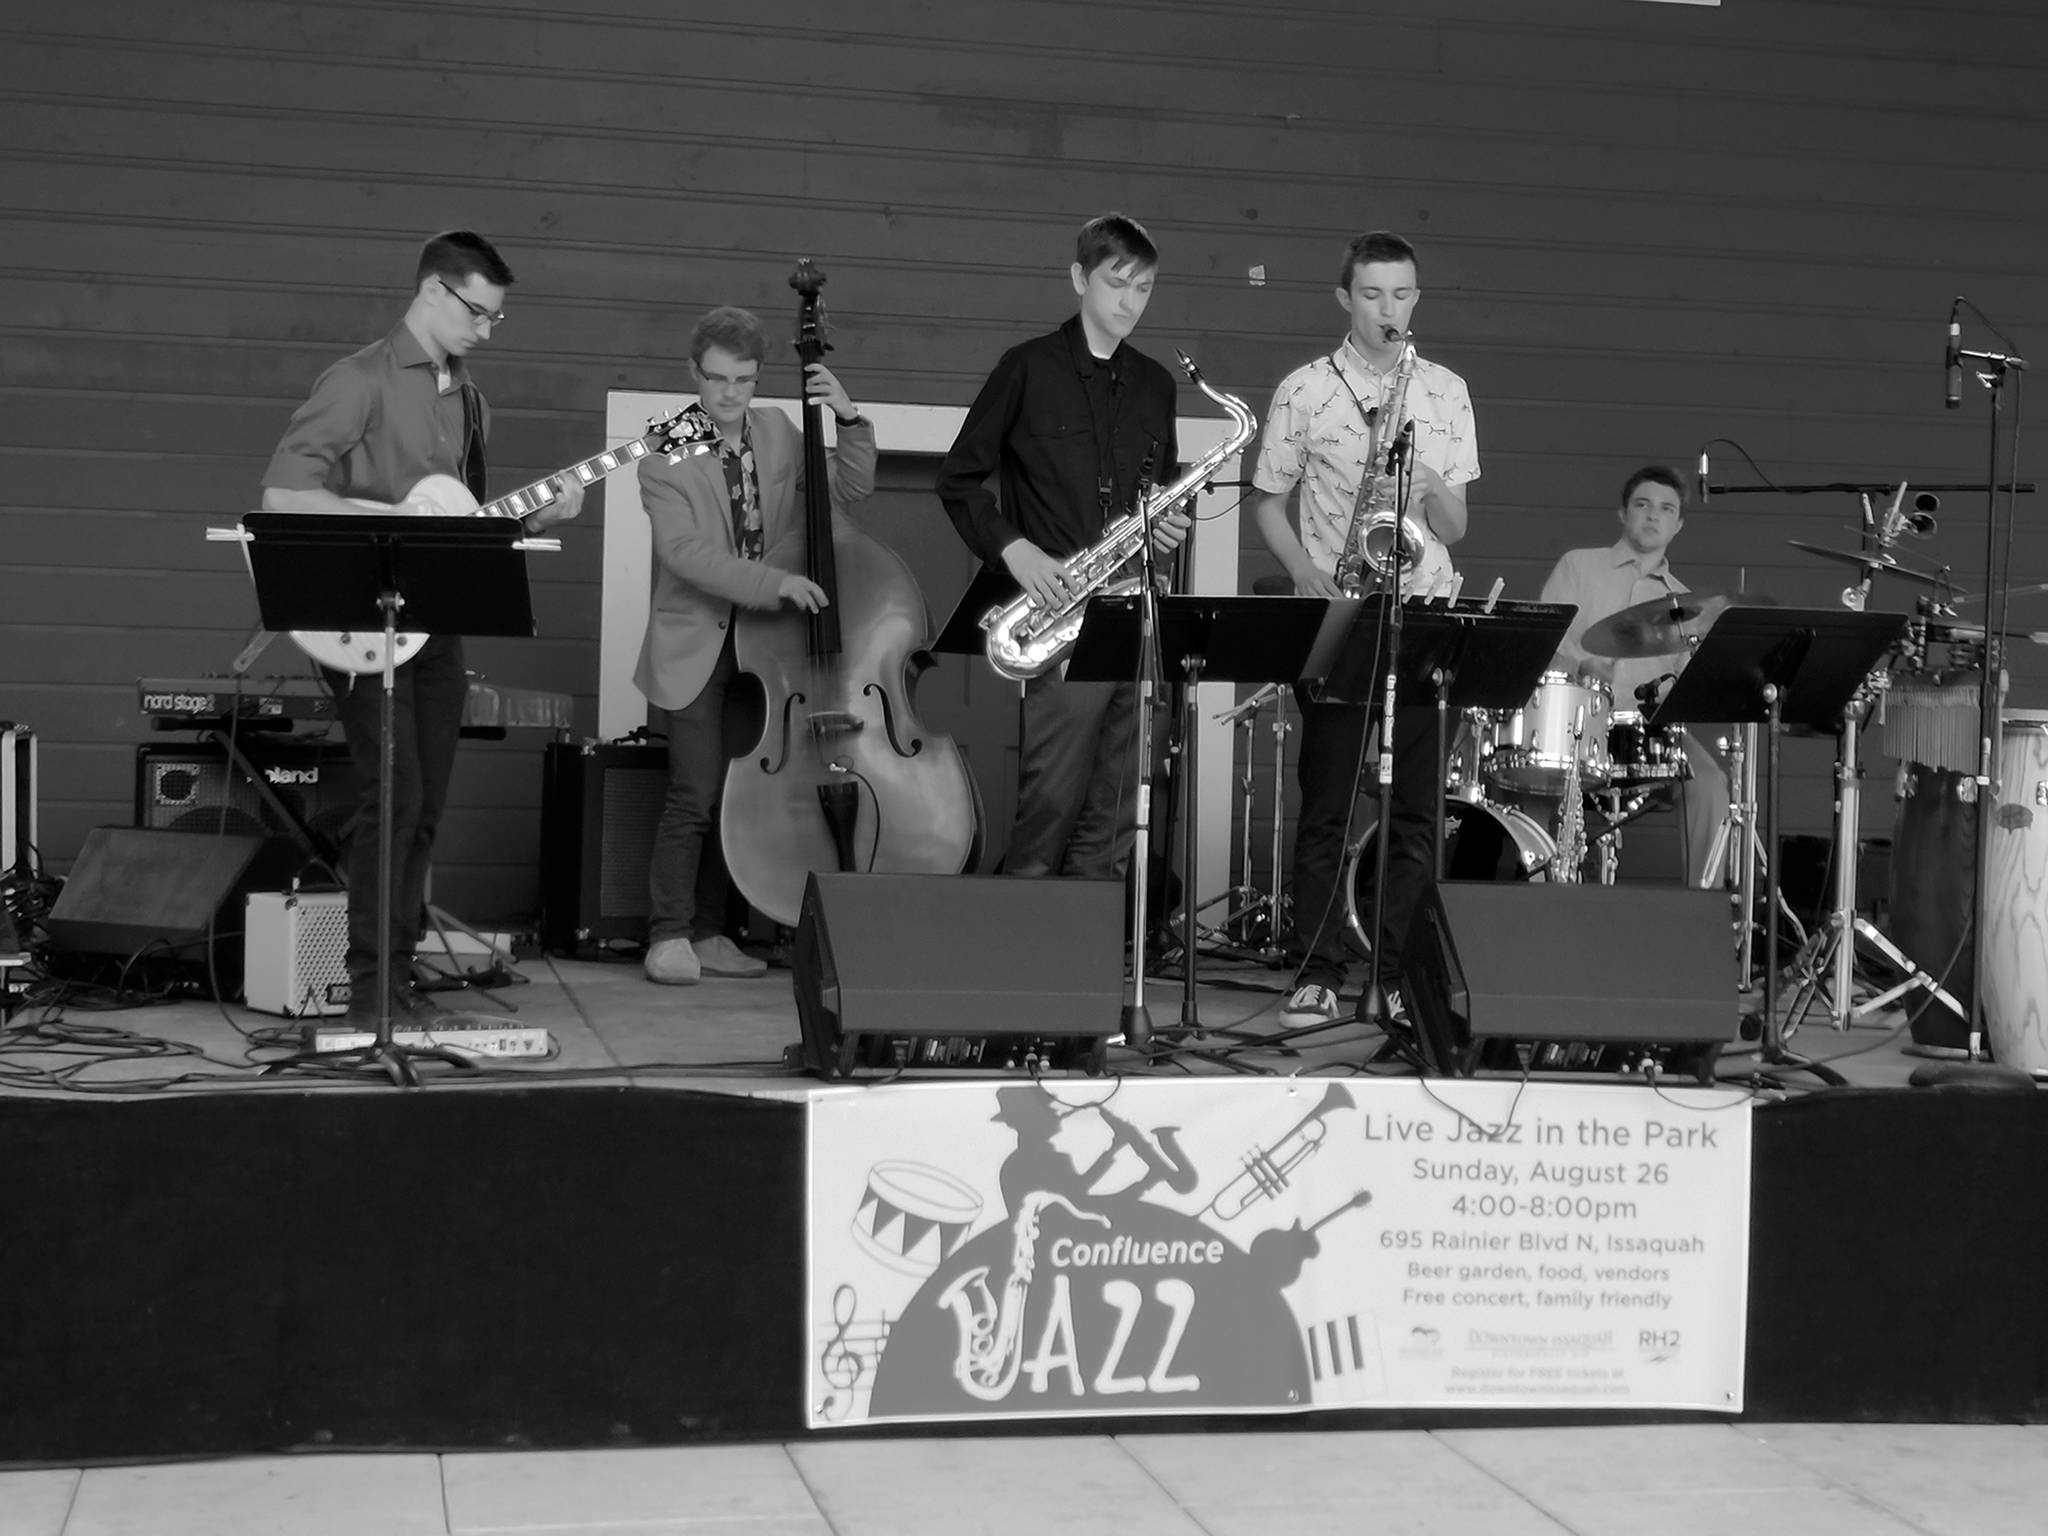 Euphony, a high-energy jazz ensemble, performs during last year’s Confluence Music Festival in Issaquah. Photo courtesy of Downtown Issaquah Association